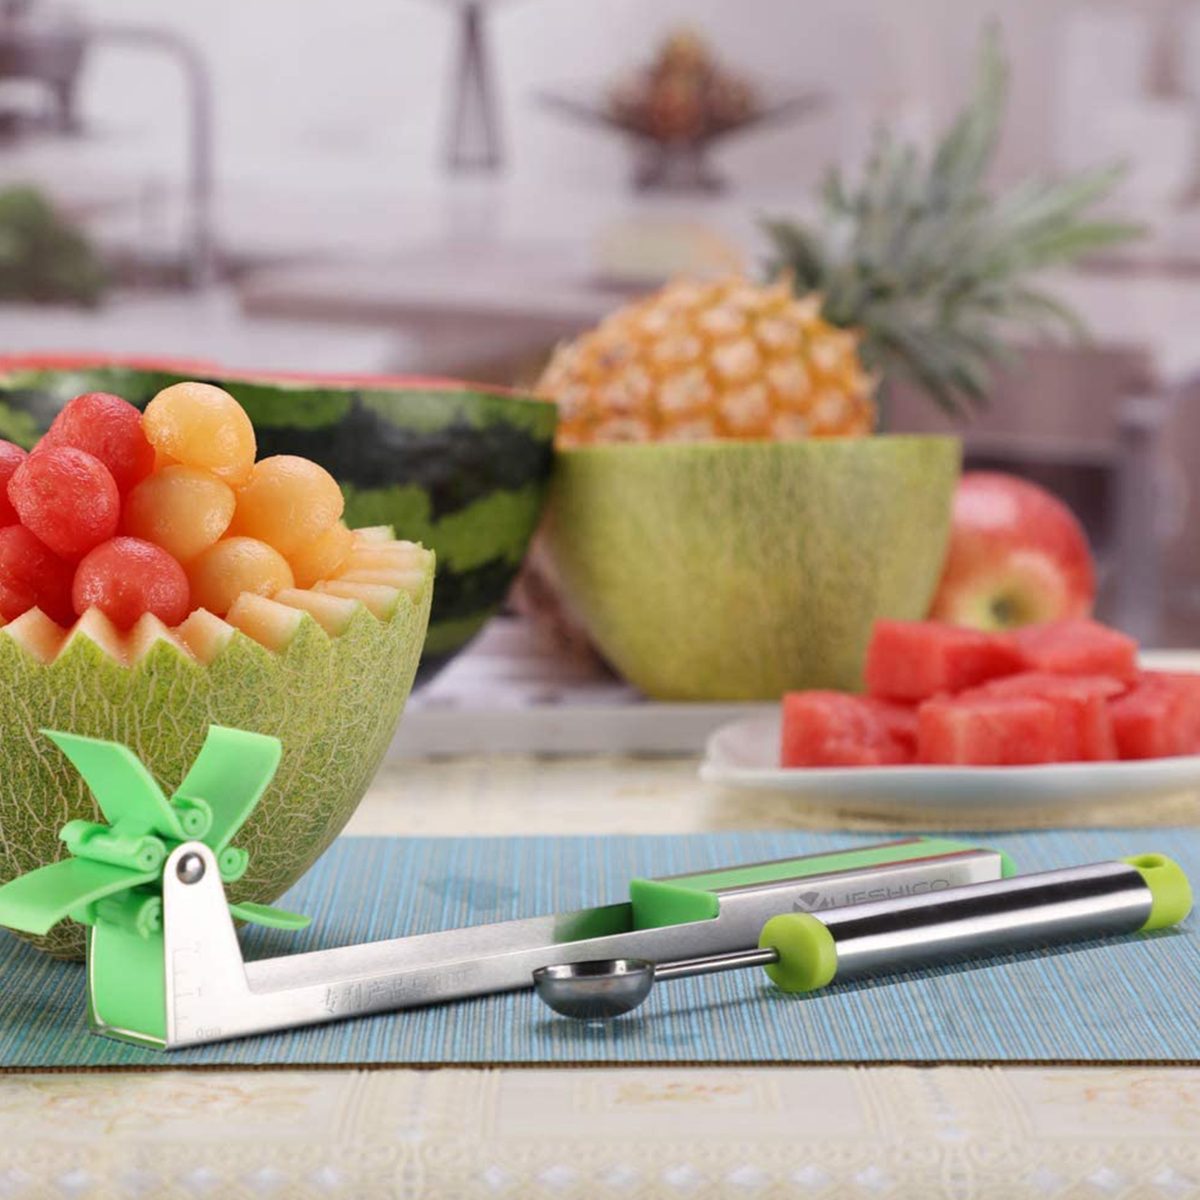 Simply Efficient Fruit Slicer : pineapple easy slicer by williams